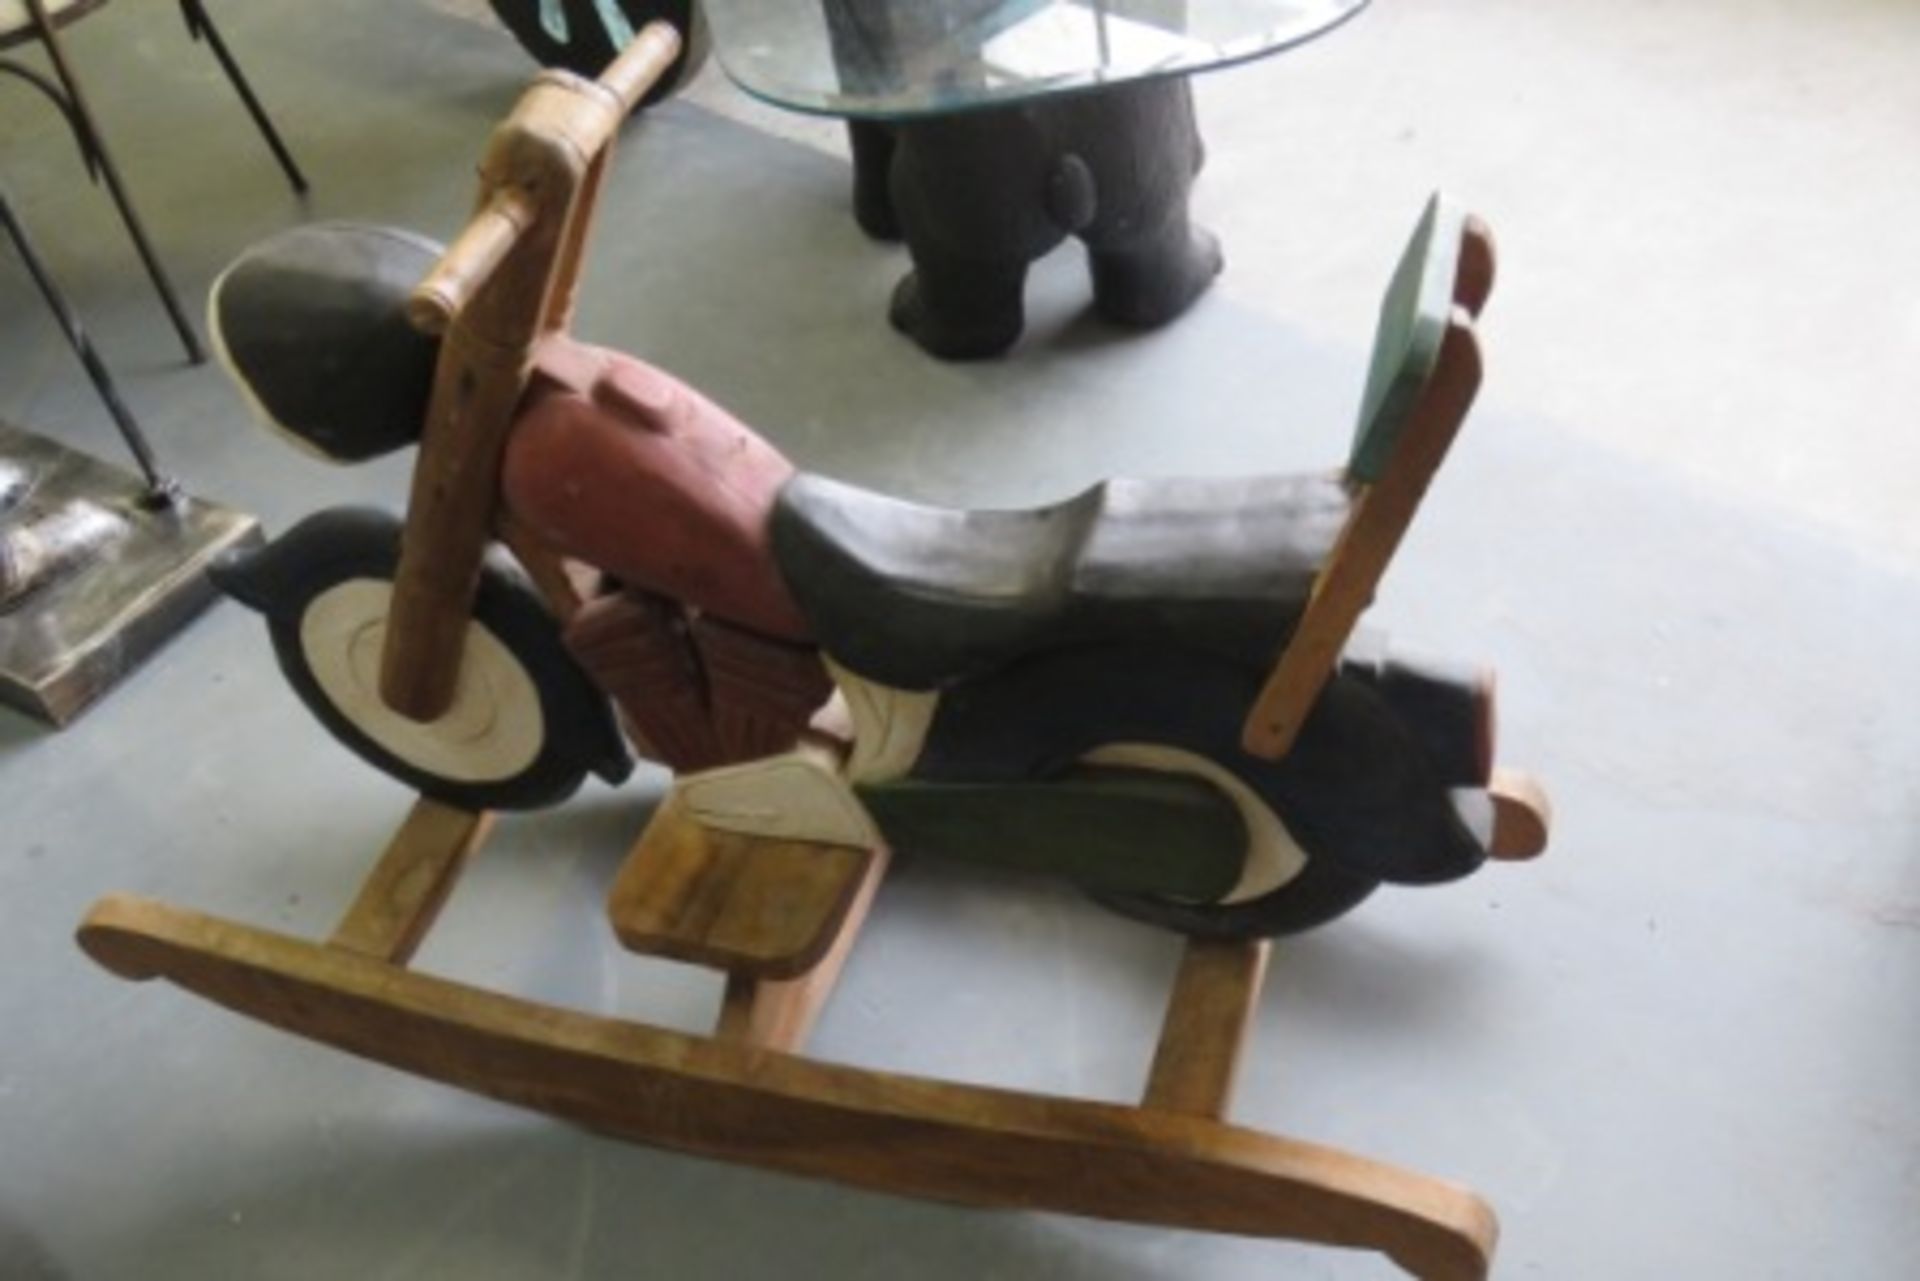 Handcrafted Wooden Motorbike Rocking Chair - Image 2 of 3